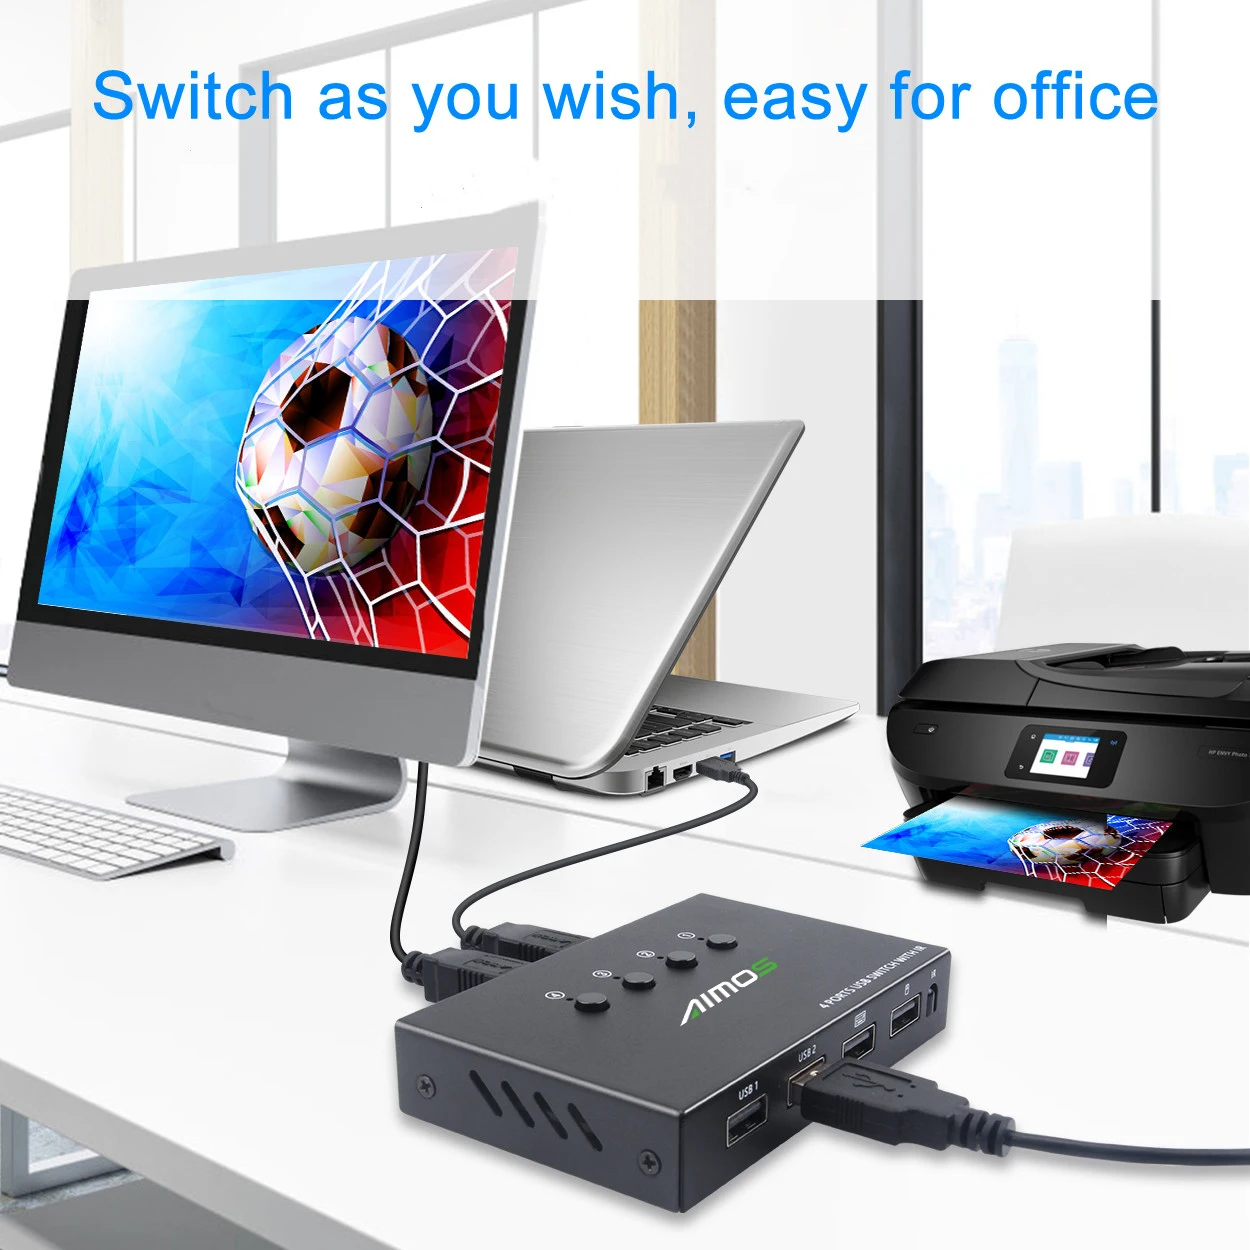 AIMOS USB Printer Sharing Device 4 in 4 Out USB Switcher U Disk HDD USB  Controller USB 4 Port Switcher for Mouse Keyboard|USB Cables| - AliExpress